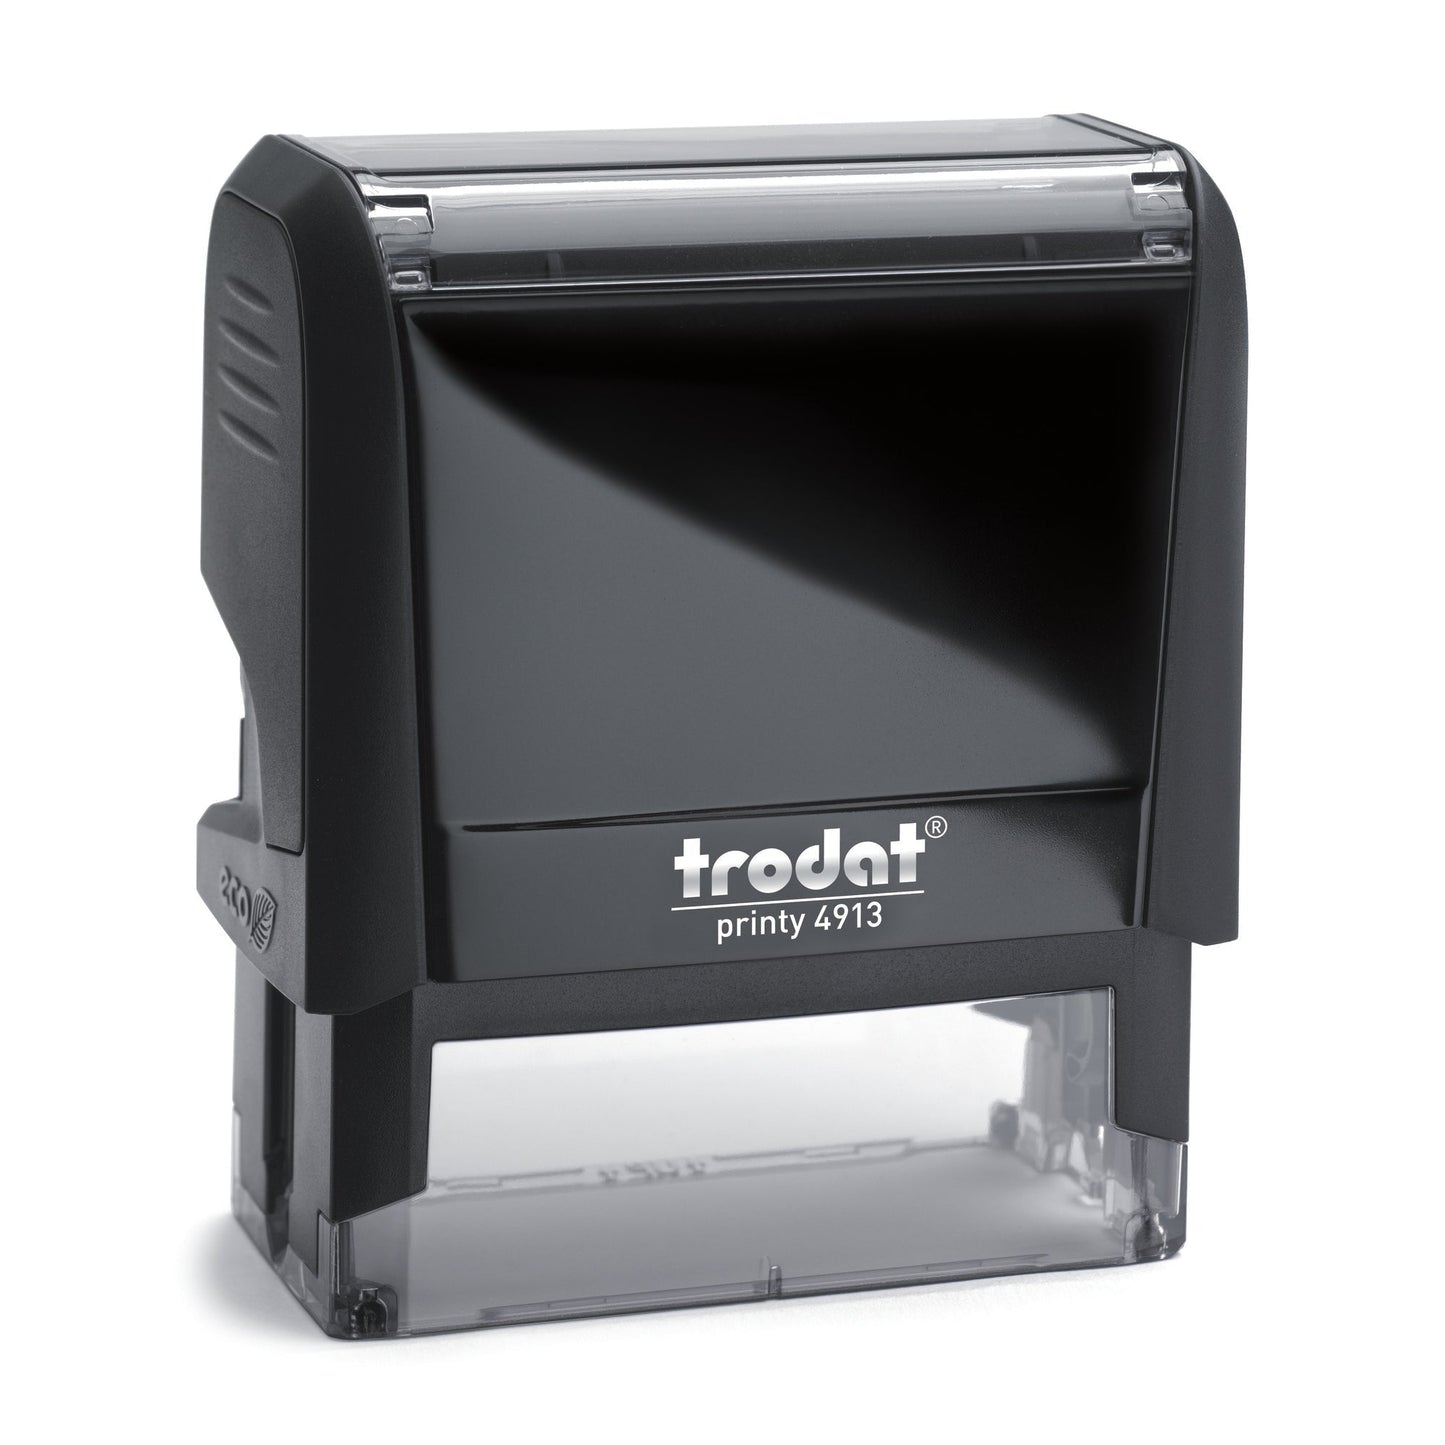 Specialist Serviced With Genuine Parts - Self Inking Rubber Stamp - Trodat 4913 - 55mm x 21mm Impression